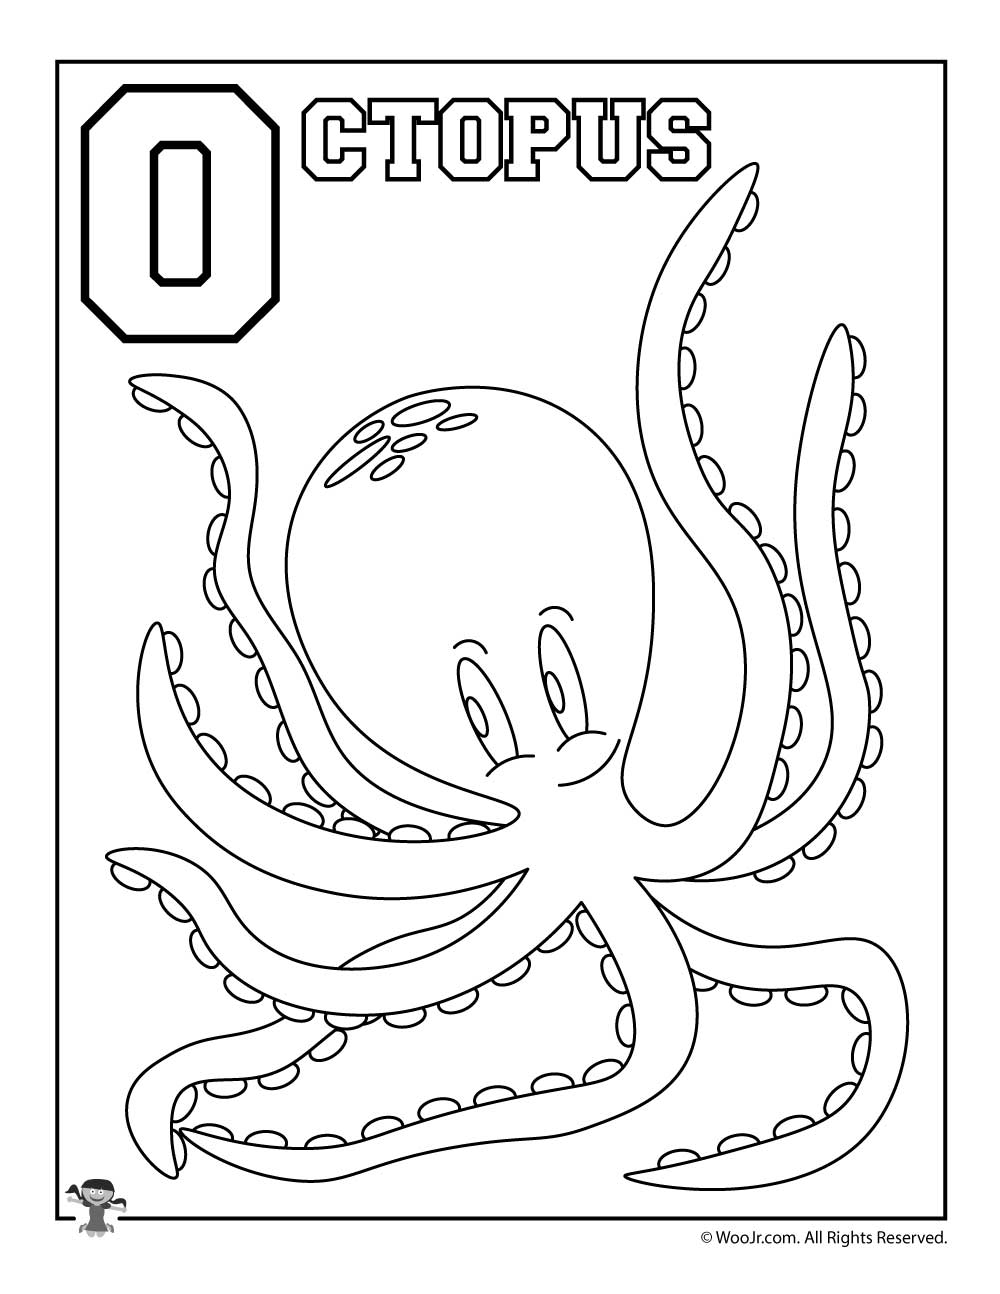 O is for Octopus Coloring Page | Woo! Jr. Kids Activities : Children's  Publishing